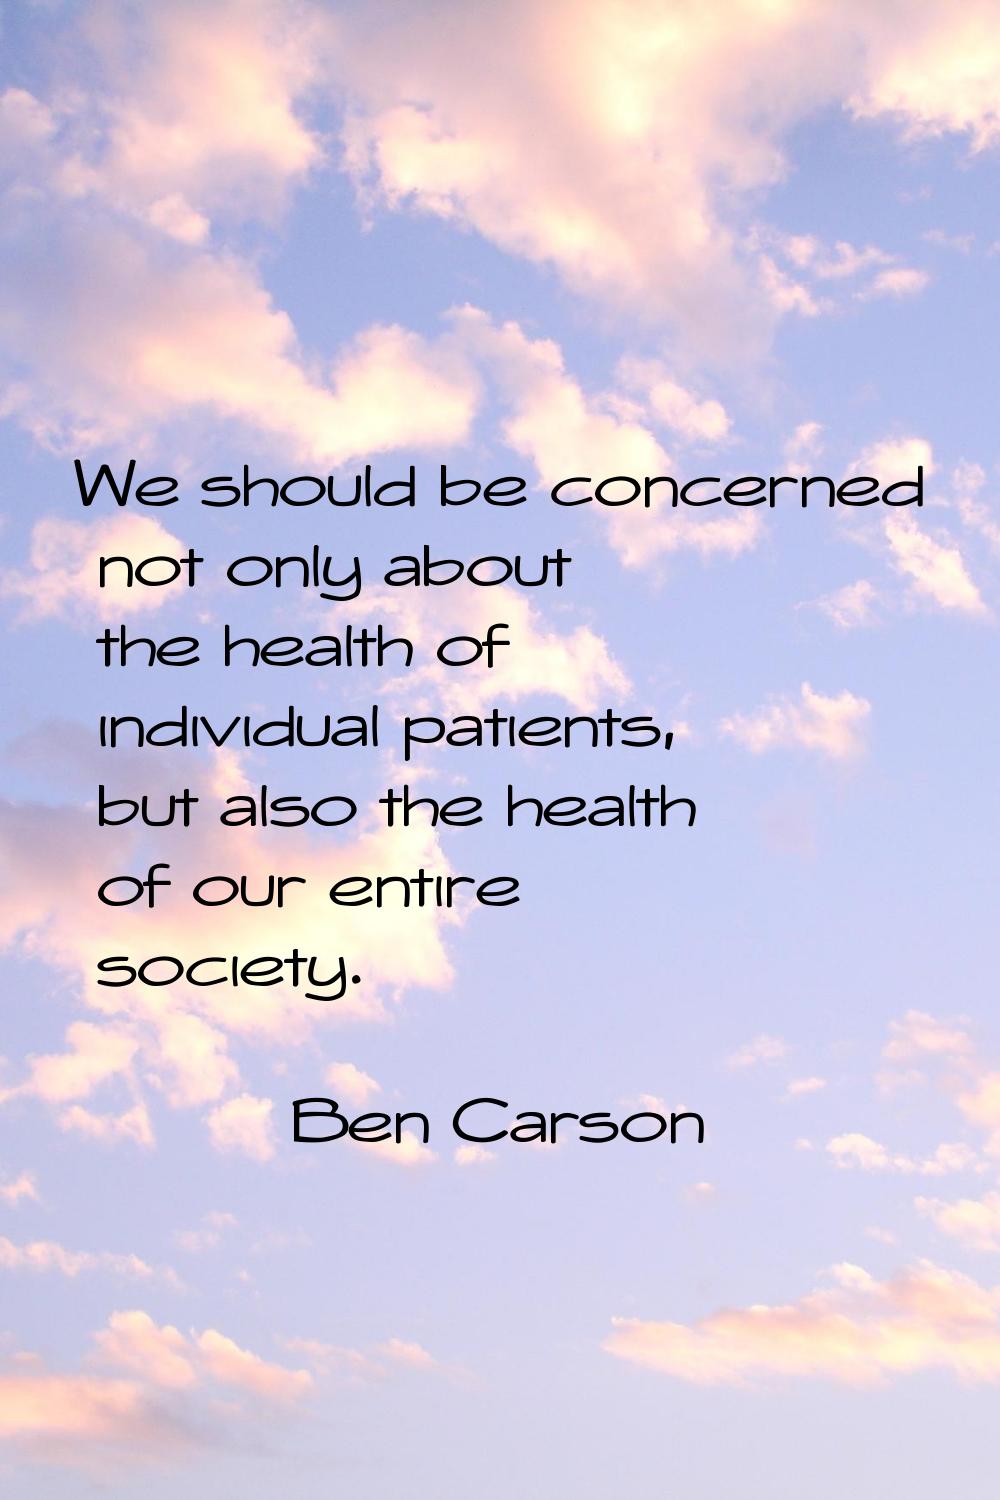 We should be concerned not only about the health of individual patients, but also the health of our